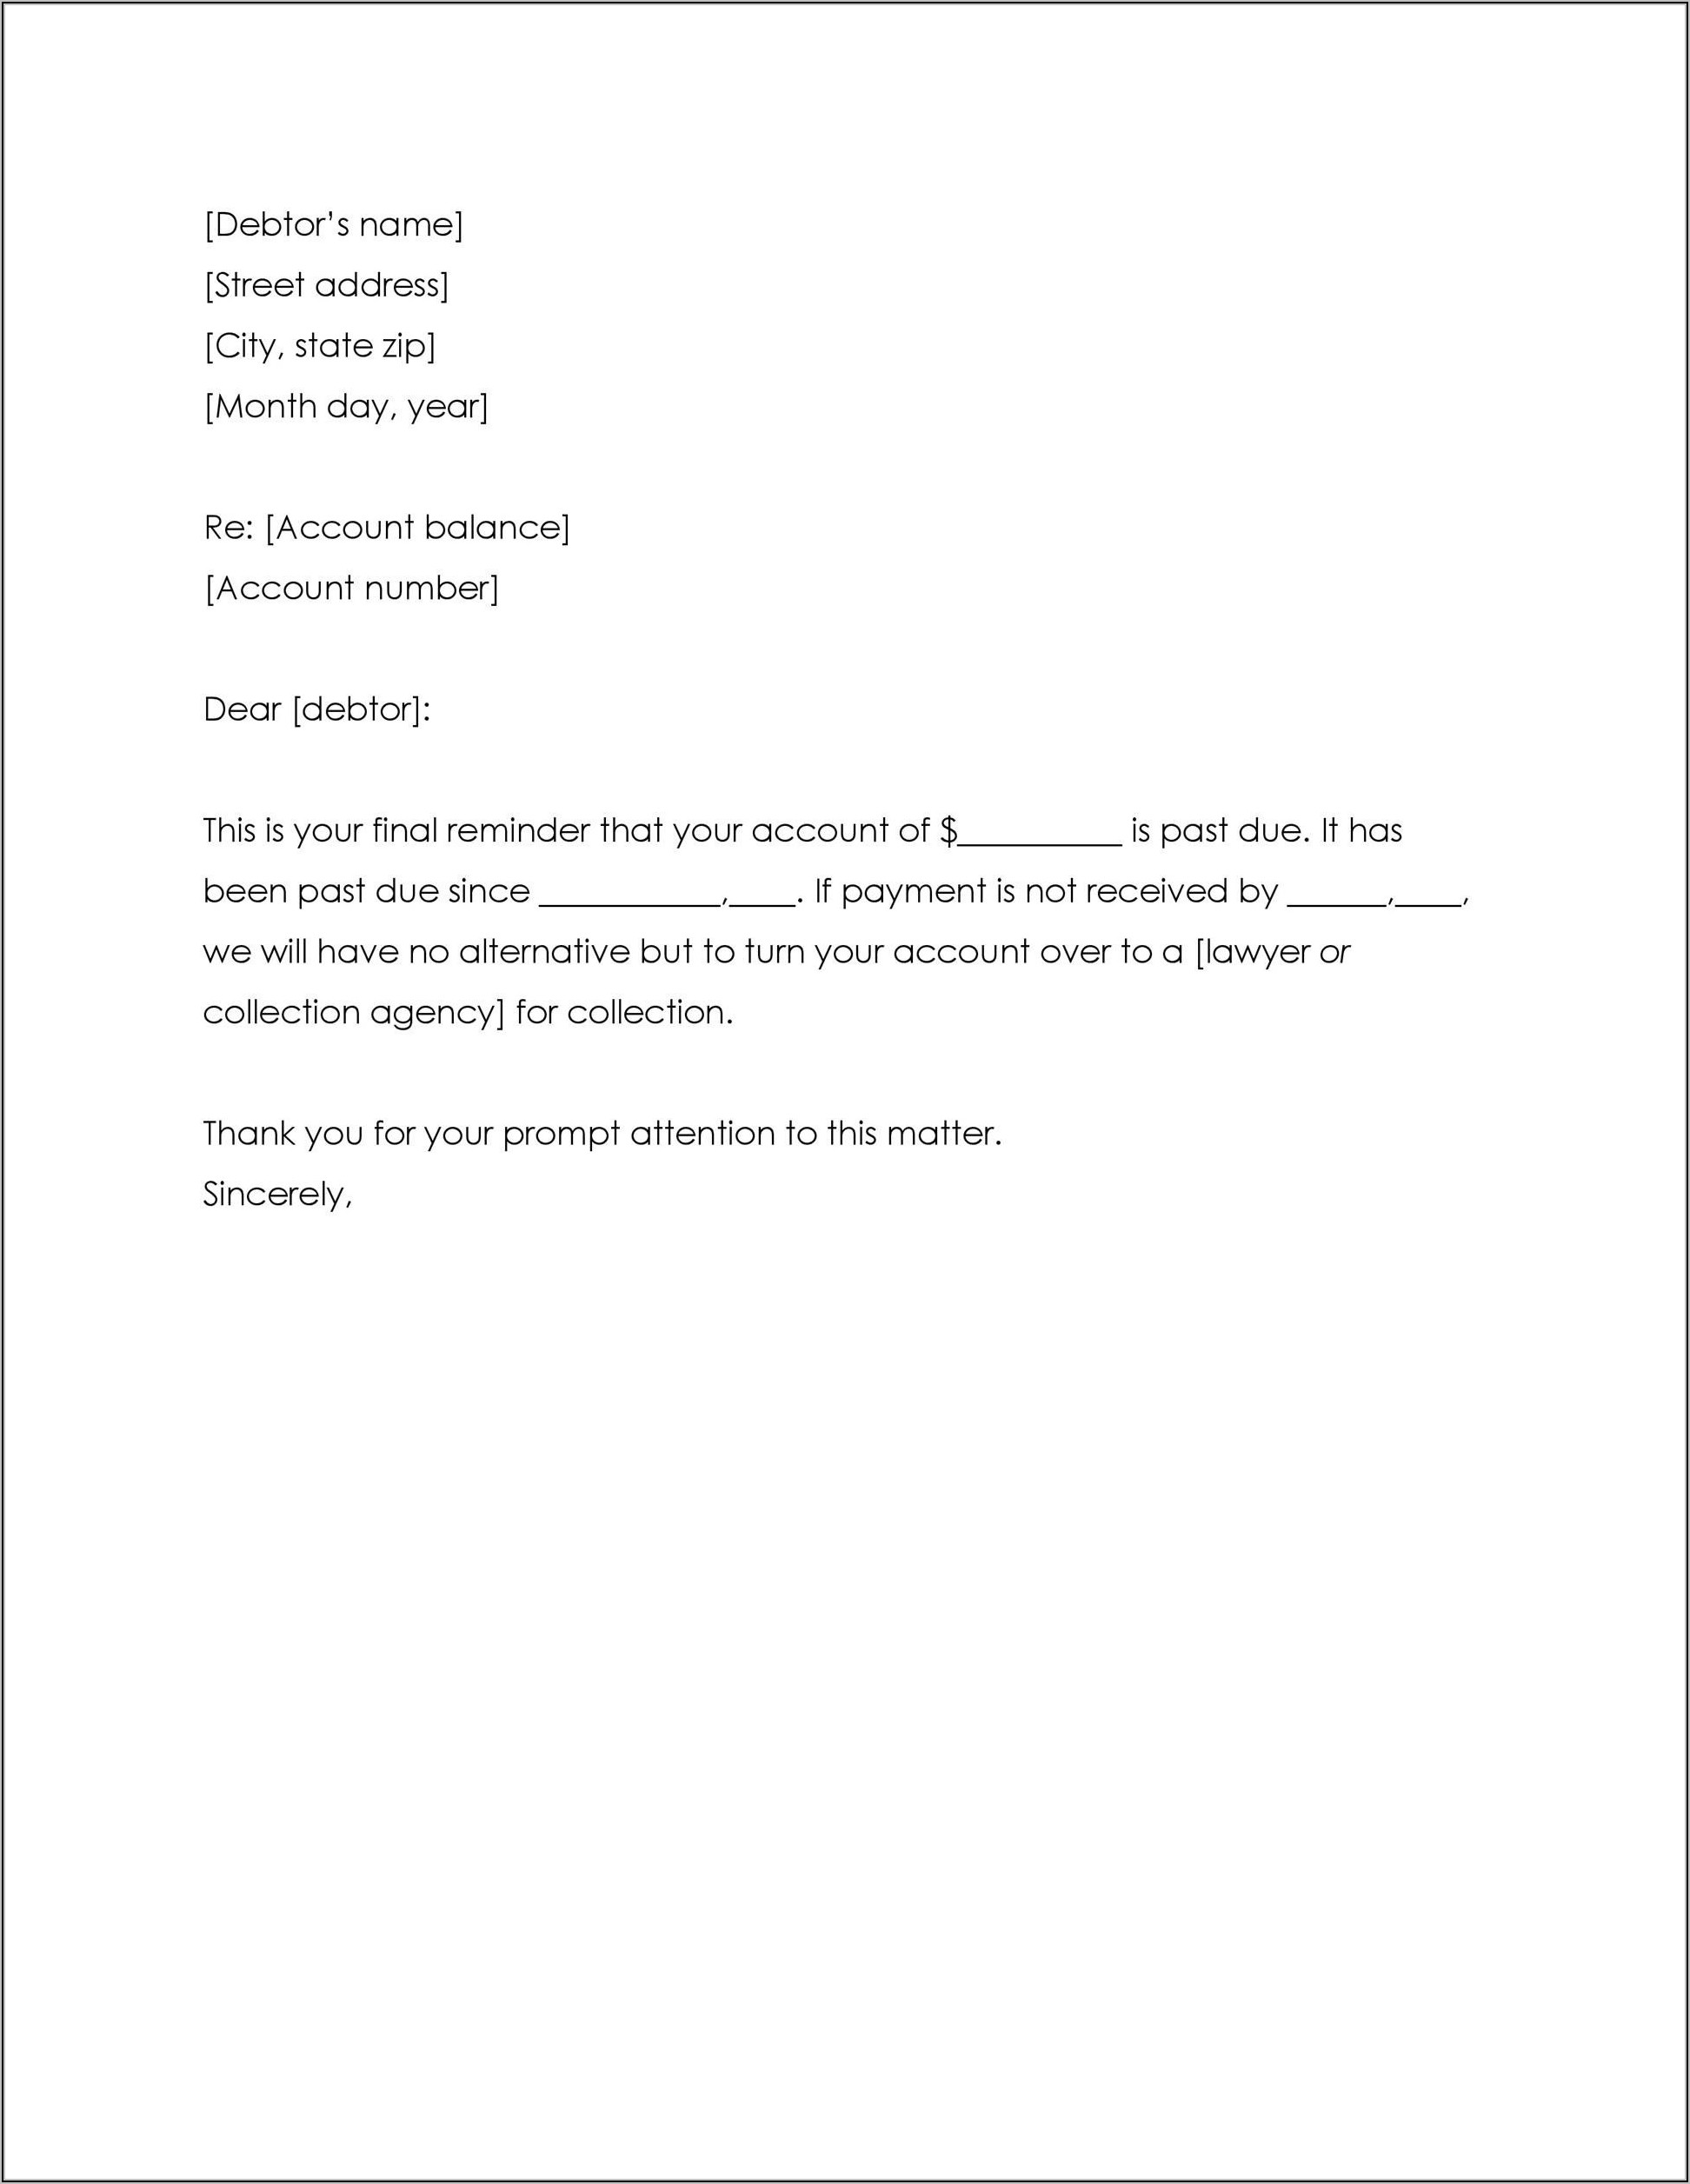 Invoice Cover Letter Template